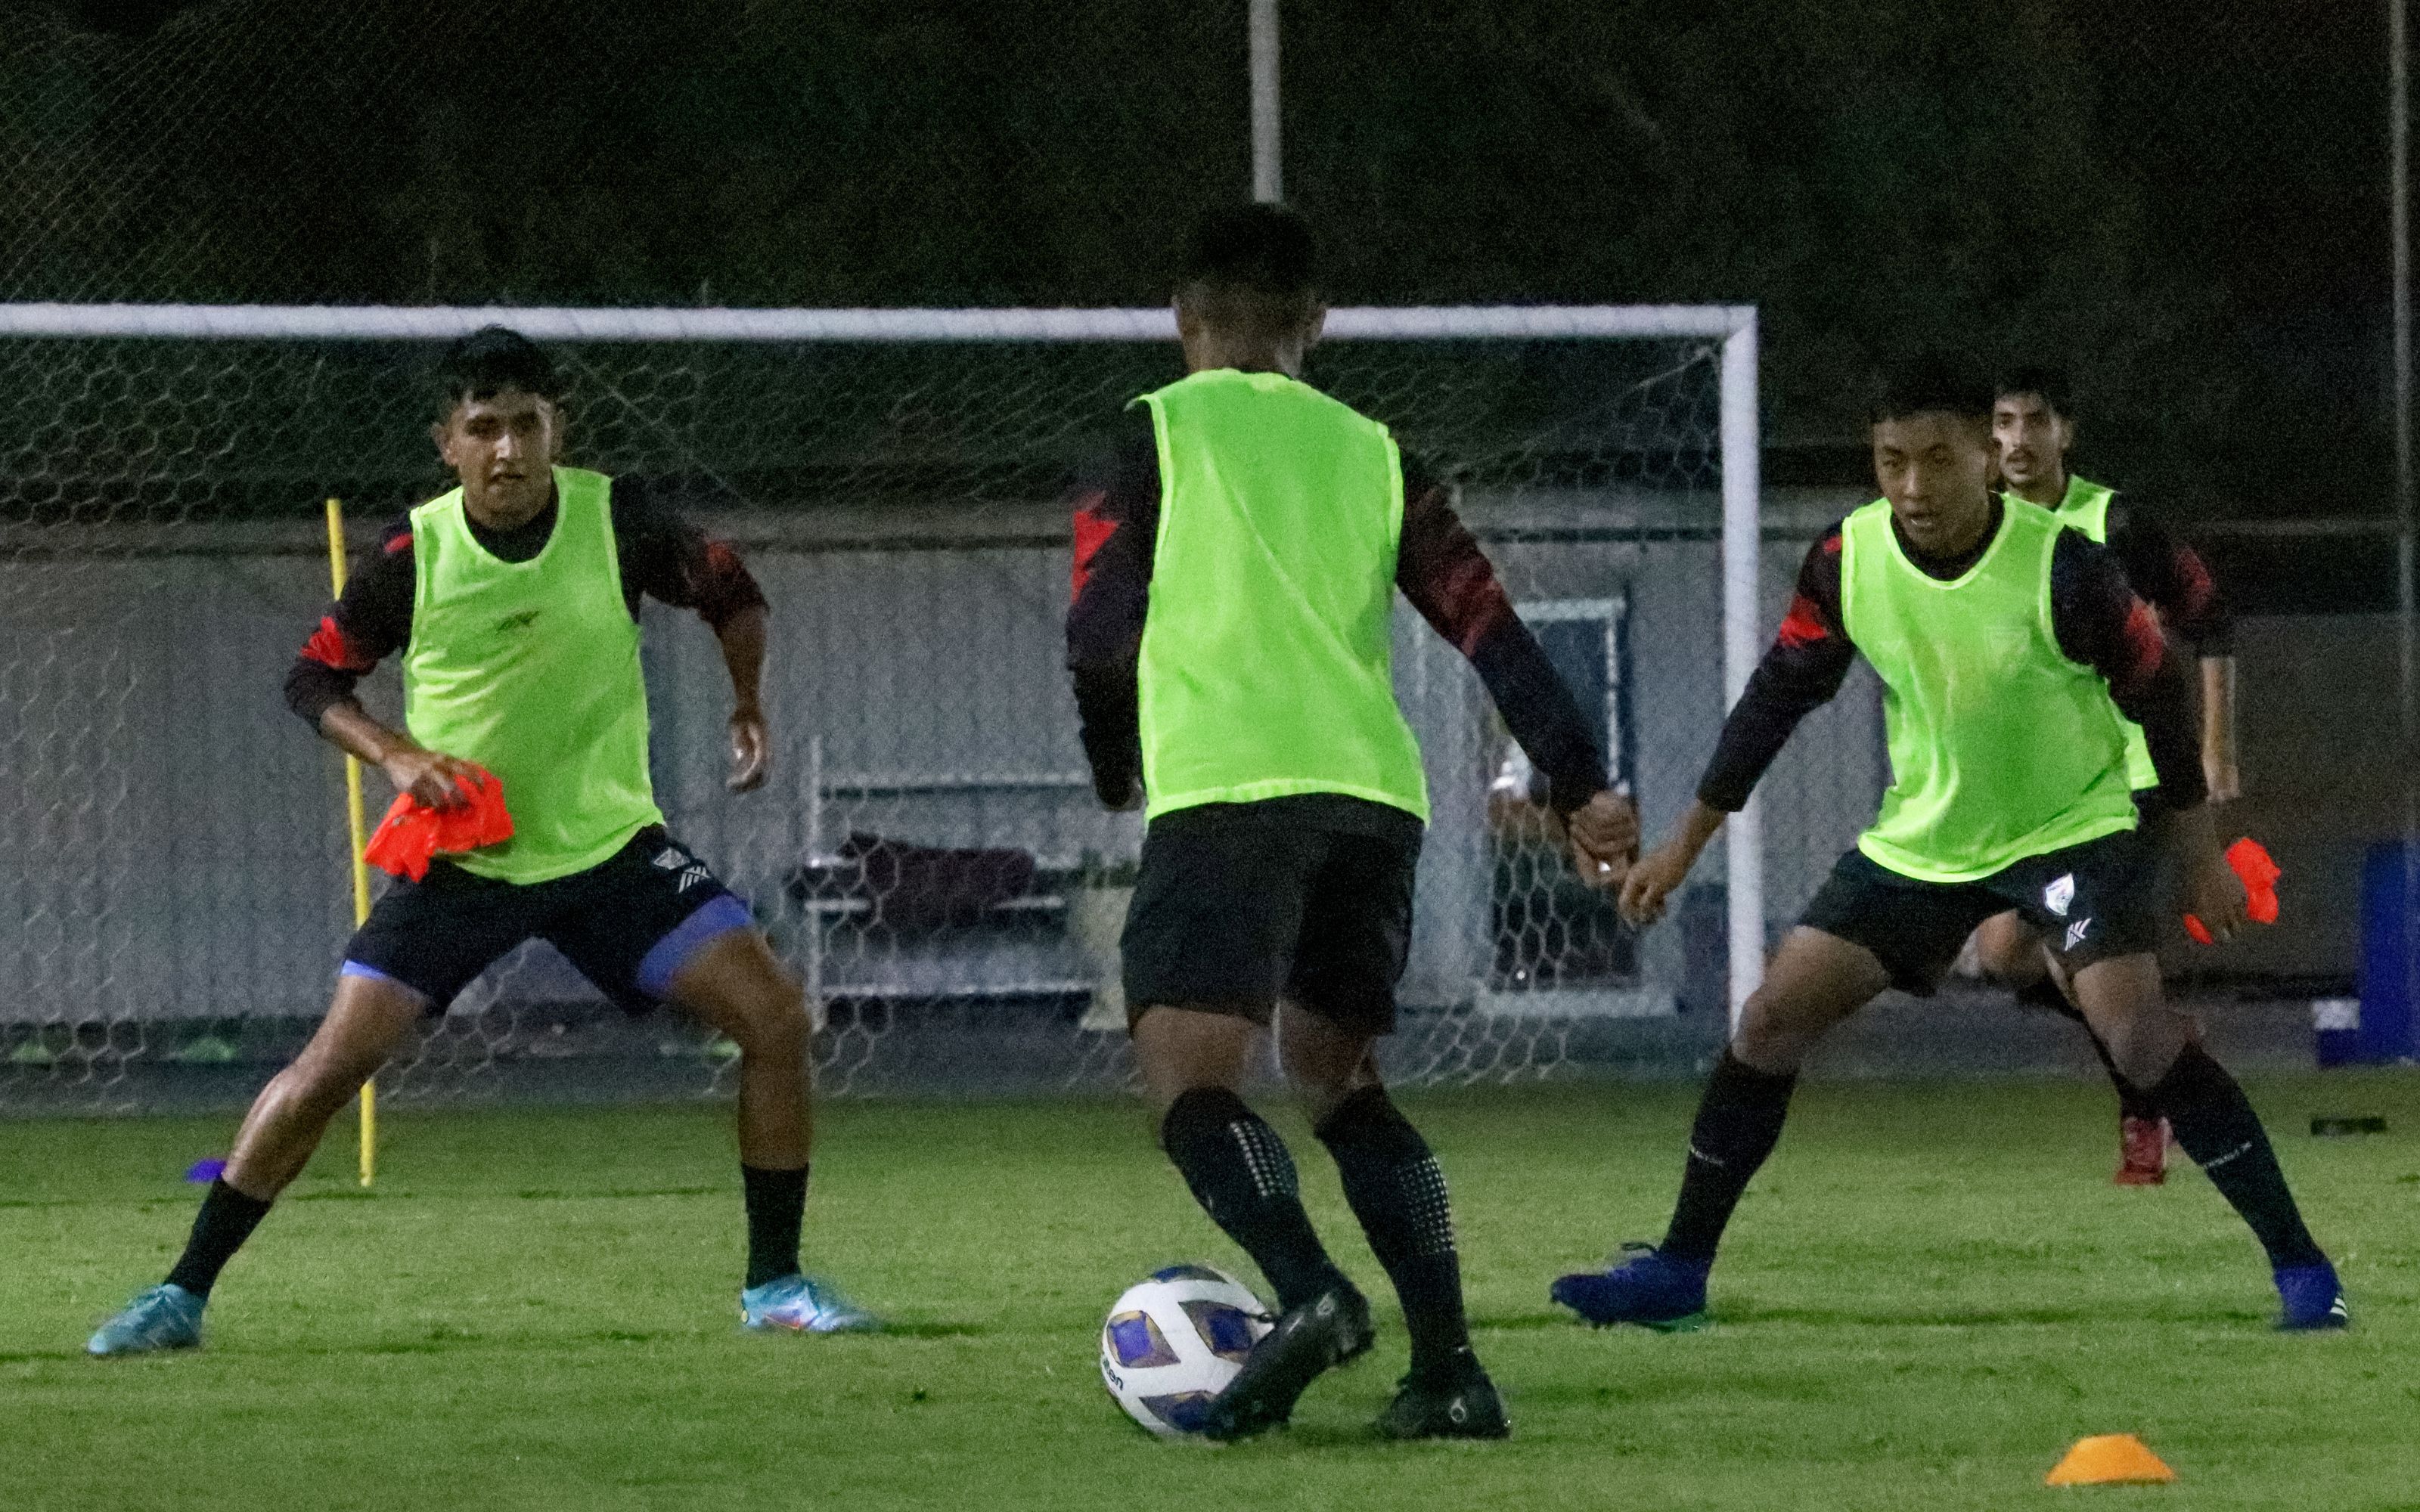 httAFC U17 Asian Cup LIVE: Indian U17 Football Team set to face Maldives in maiden clash-Check Out LIVE Streaming Updatesps://www.insidesport.in/afc-u17-asian-cup-head-coach-bibiano-fernandes-asserts-confidence-in-the-indian-u17-team-check-out/